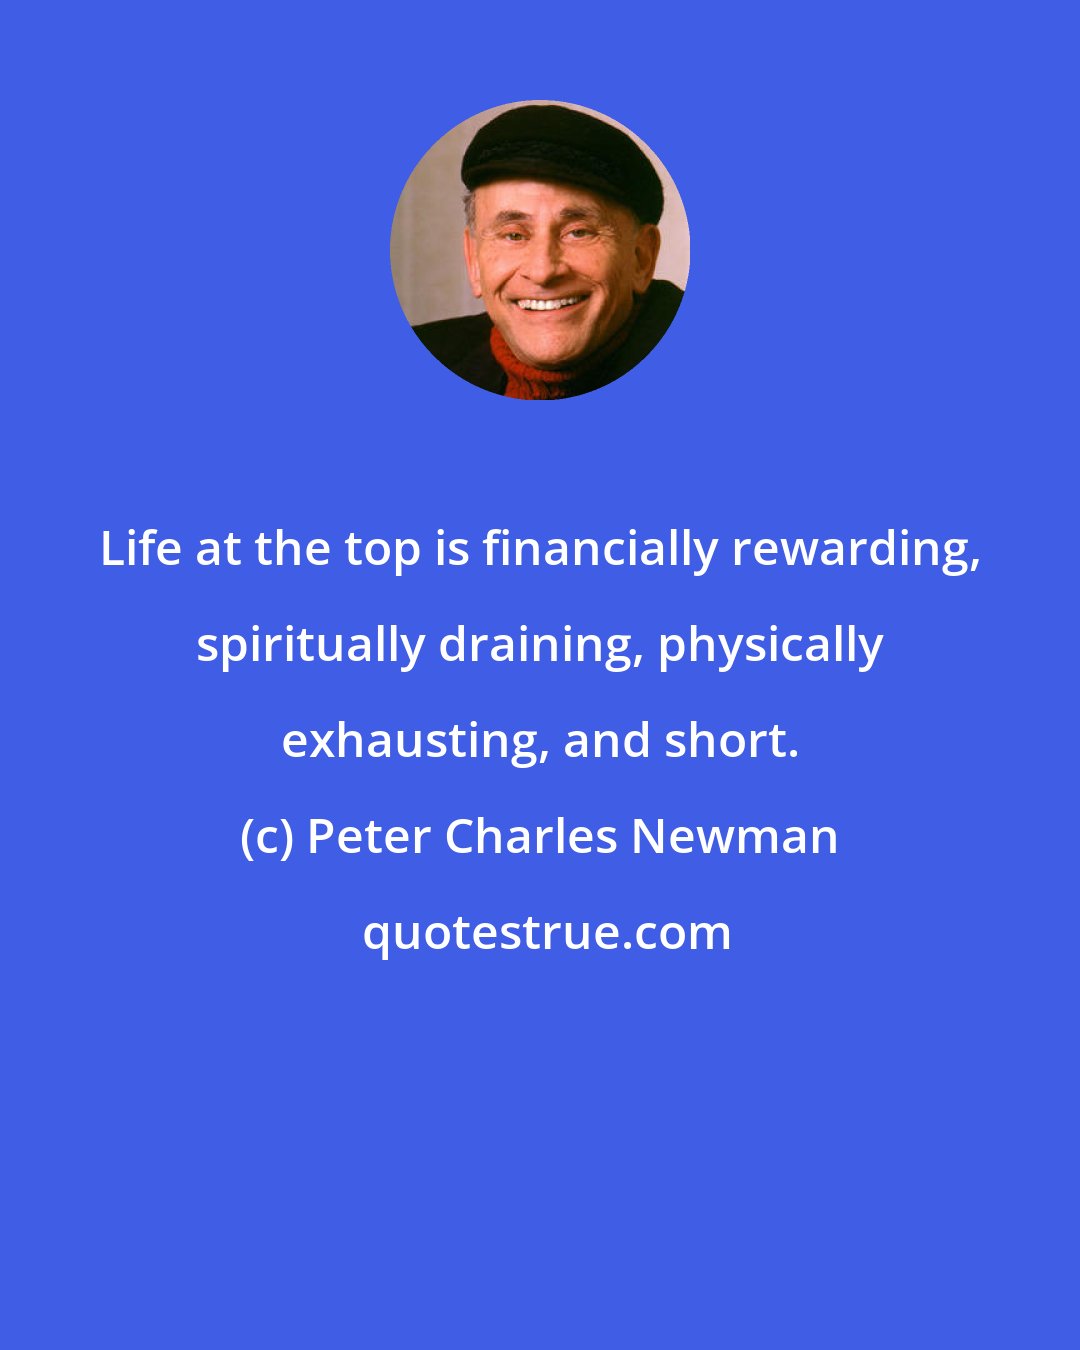 Peter Charles Newman: Life at the top is financially rewarding, spiritually draining, physically exhausting, and short.